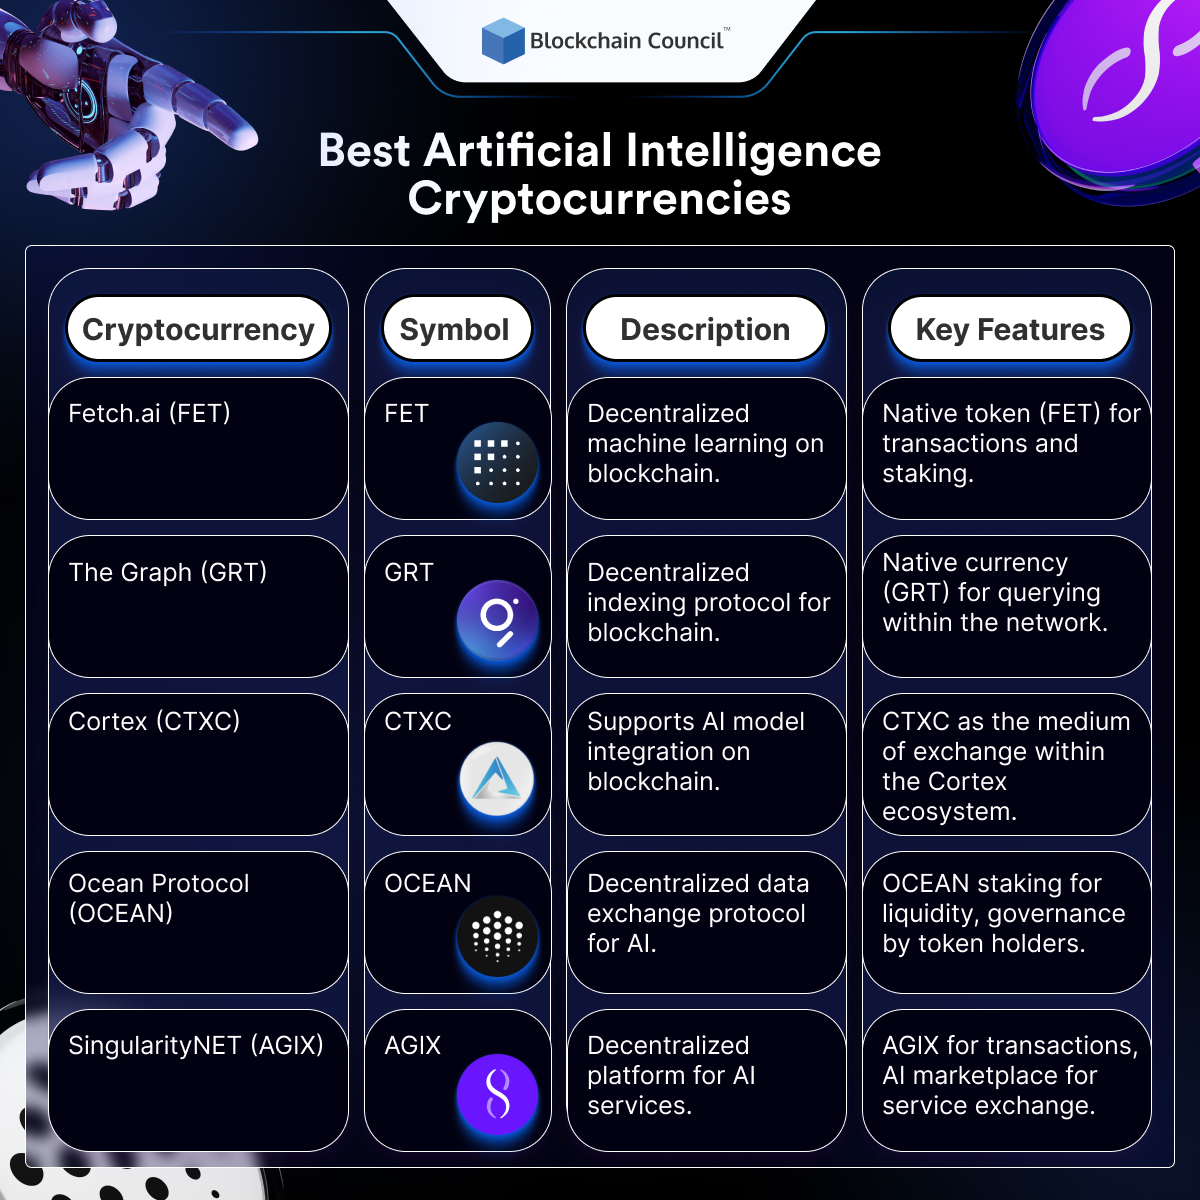 Best Artificial Intelligence Cryptocurrencies